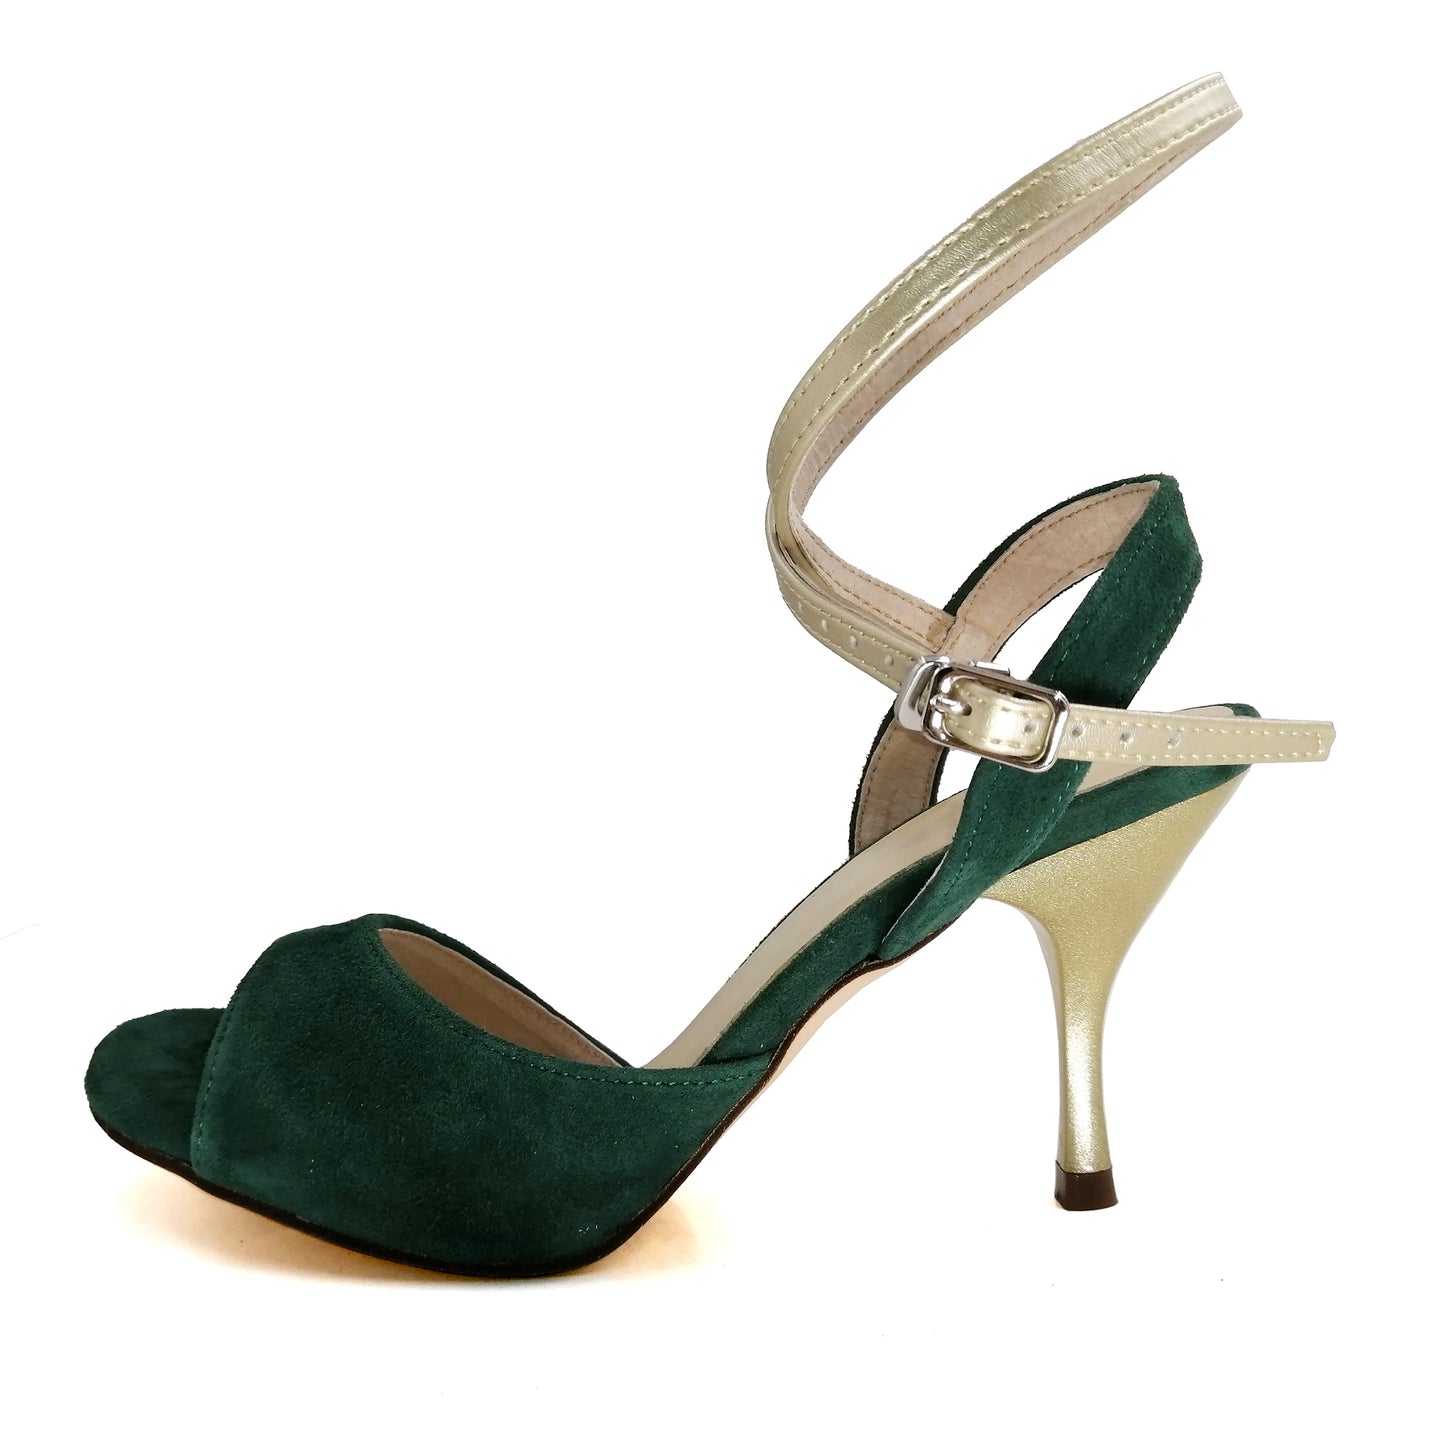 Pro Dancer Argentine Tango Shoes with Leather Sole and Dark Green Heels2